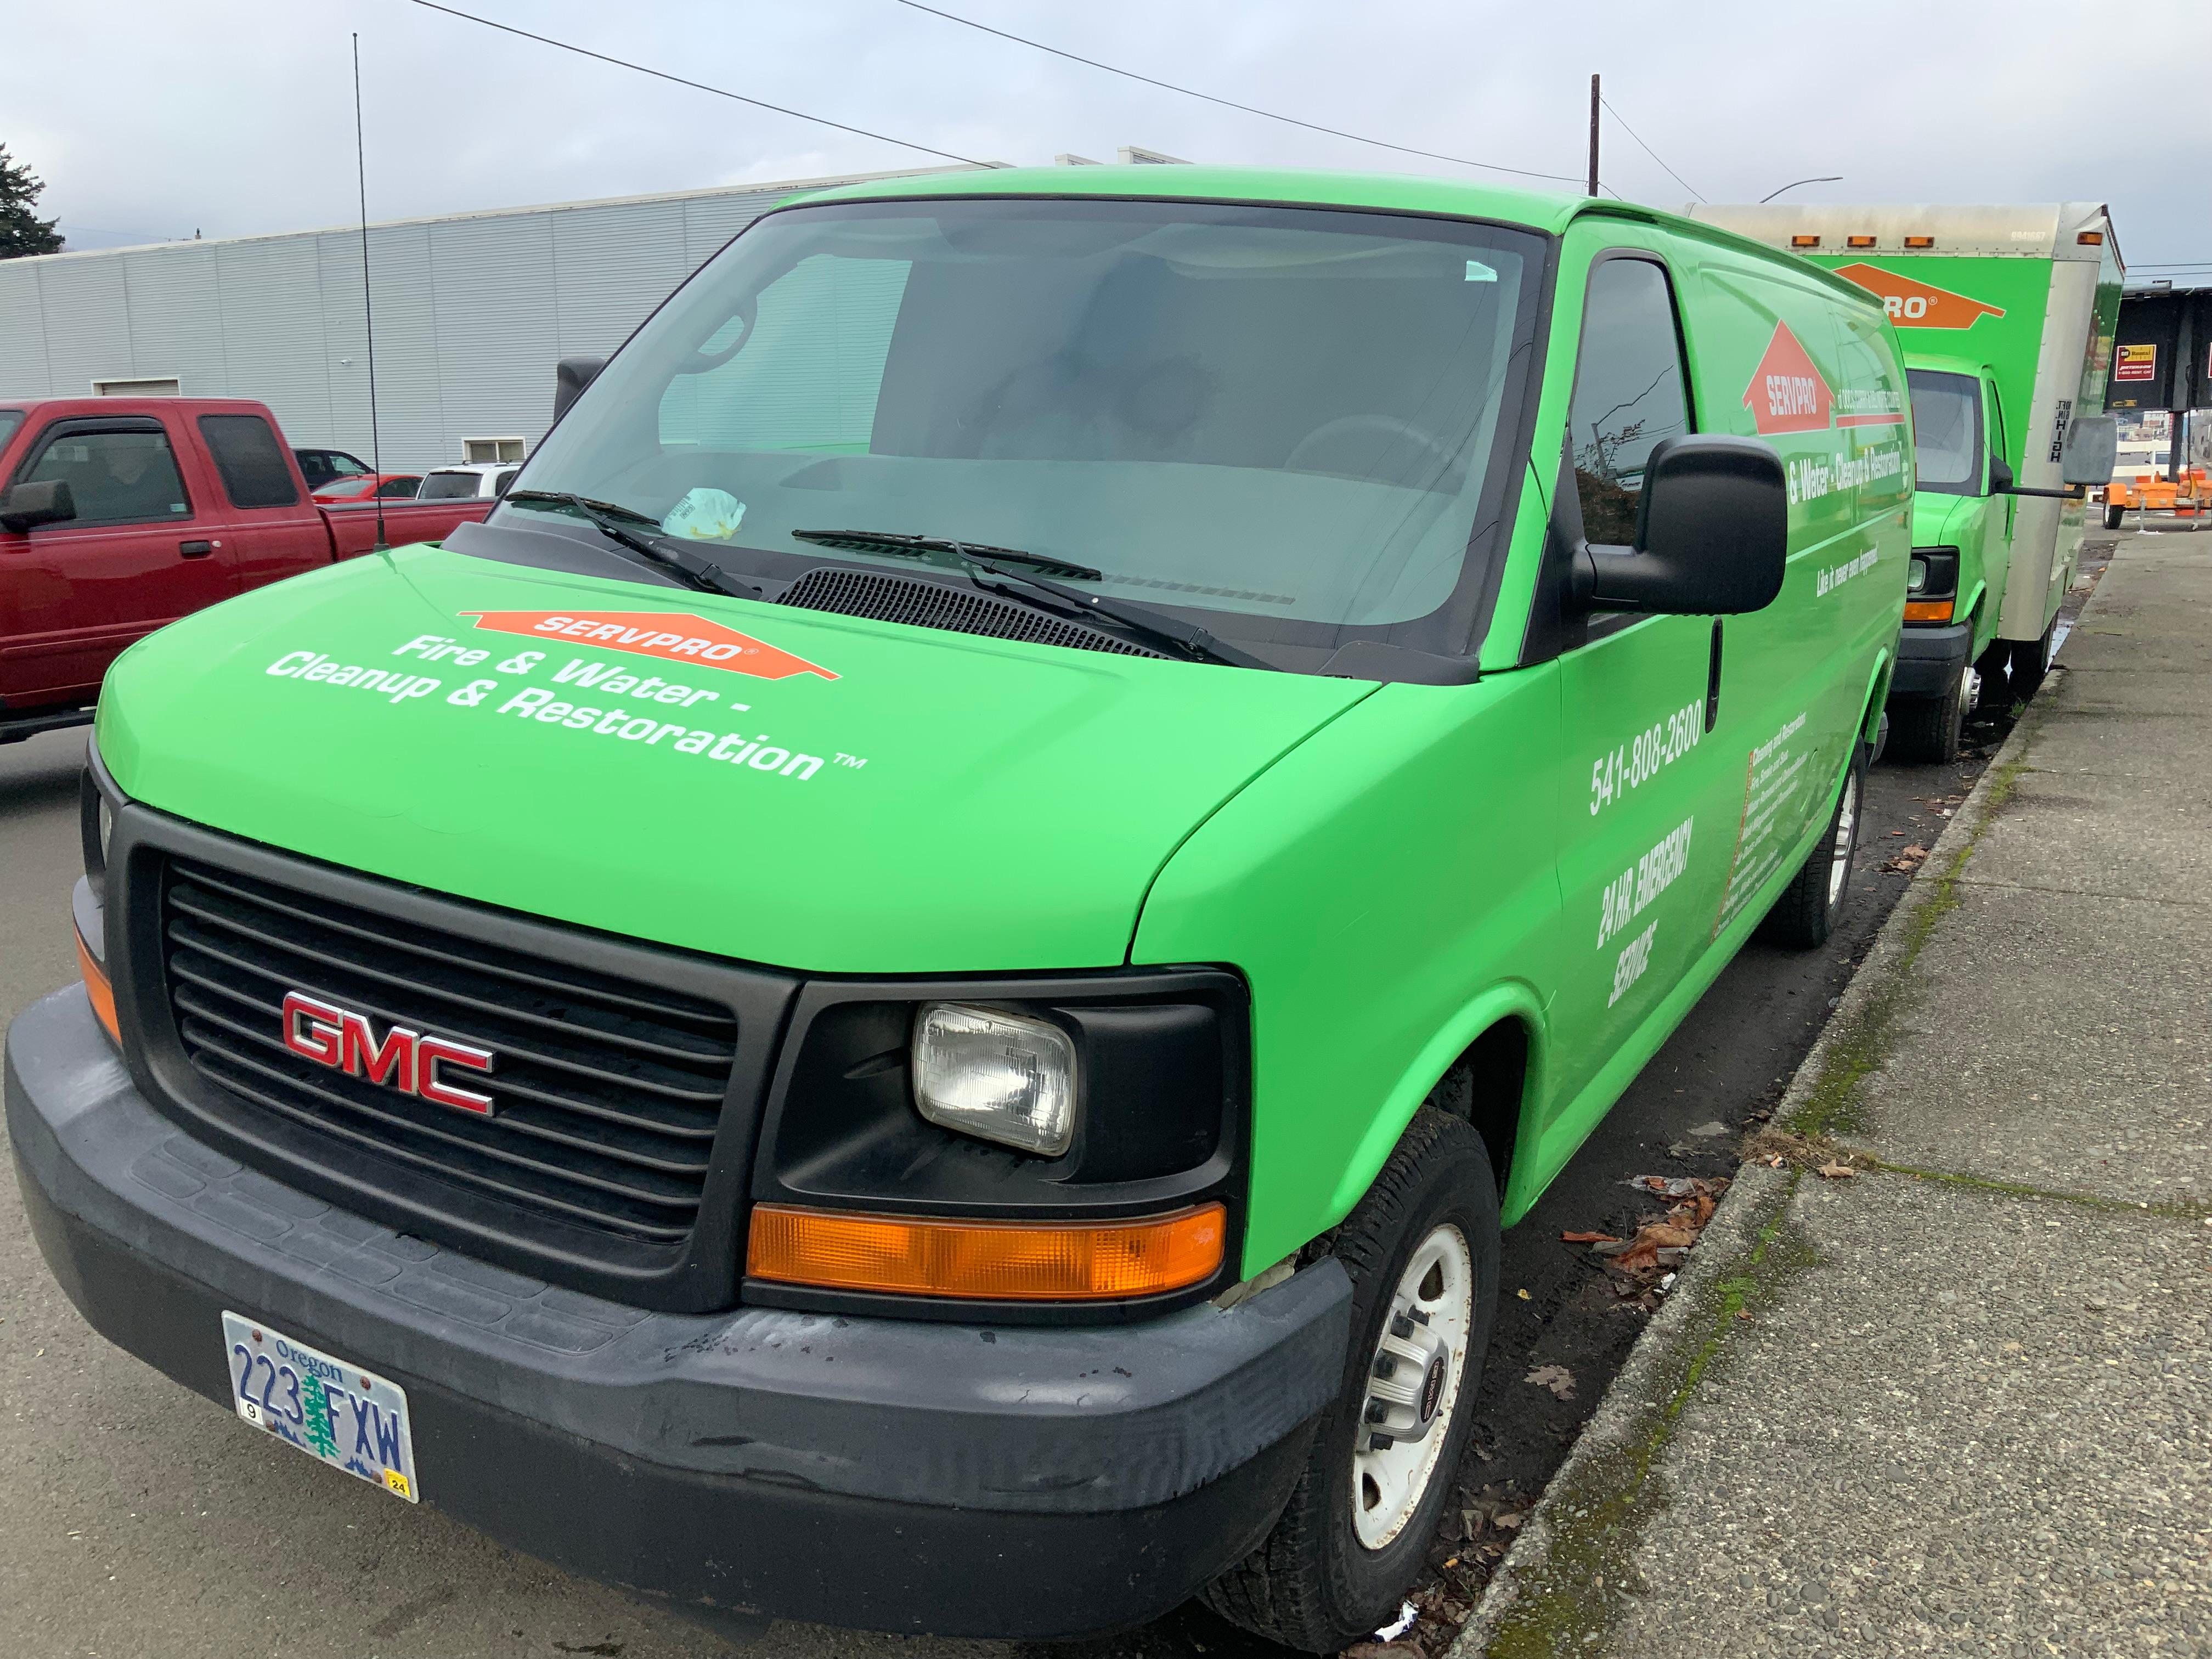 Servpro van ready to help anyone in our community and surrounding communities. Servpro is a 24 hour business and is always ready for your call.